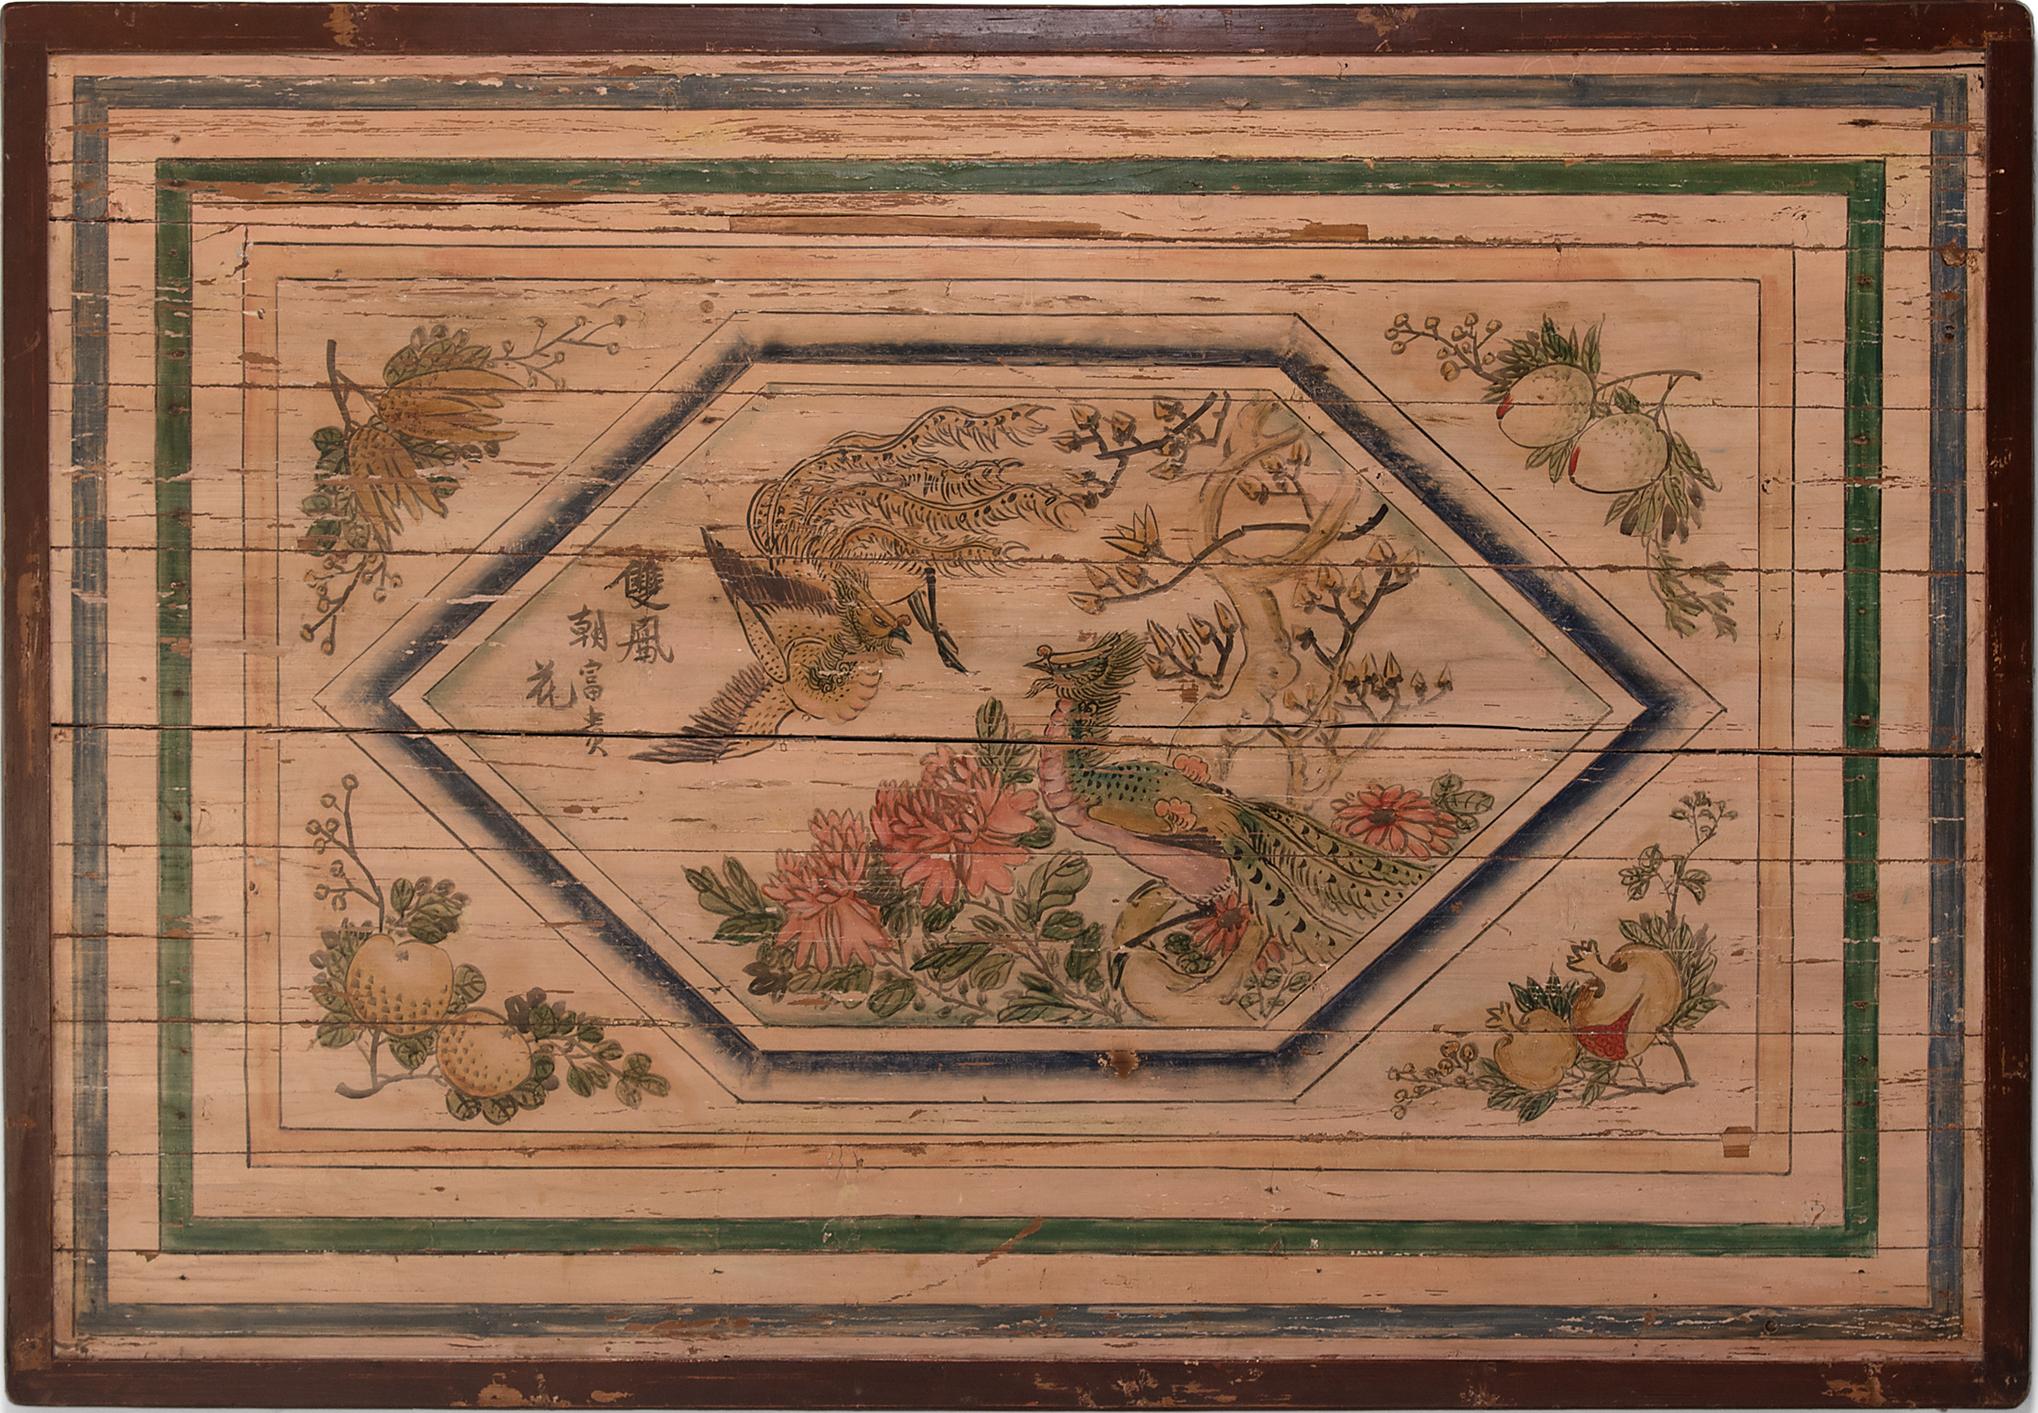 Unknown Figurative Painting - Chinese Bed Canopy of Phoenix and Fruits, Paint on Wood Panel, c. 1850